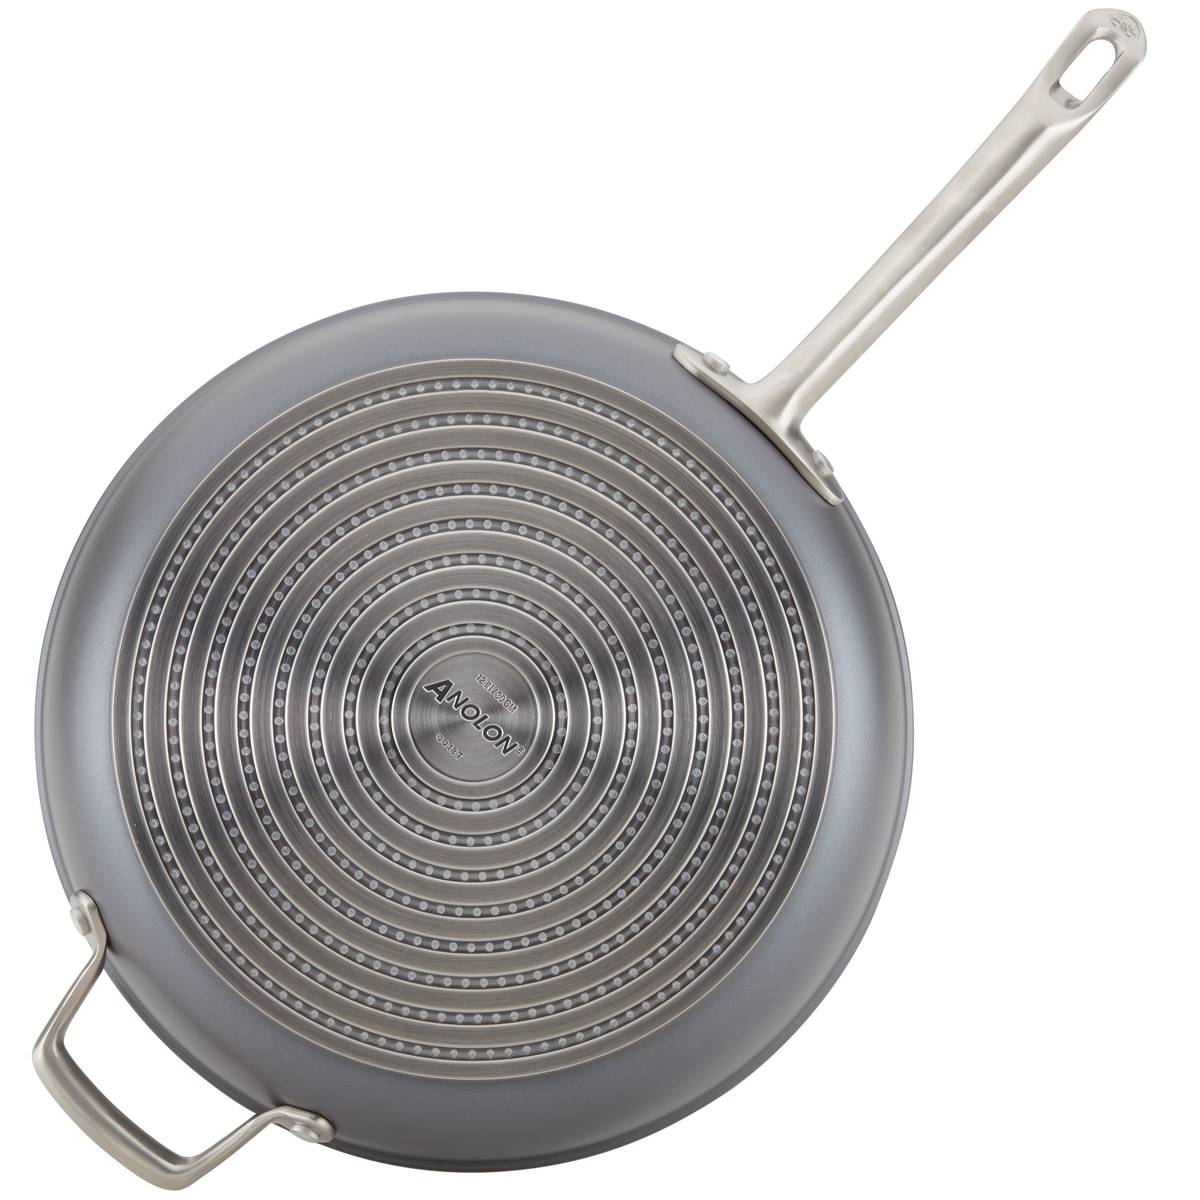 Anolon(R) Accolade 12in. Hard-Anodized Nonstick Deep Frying Pan